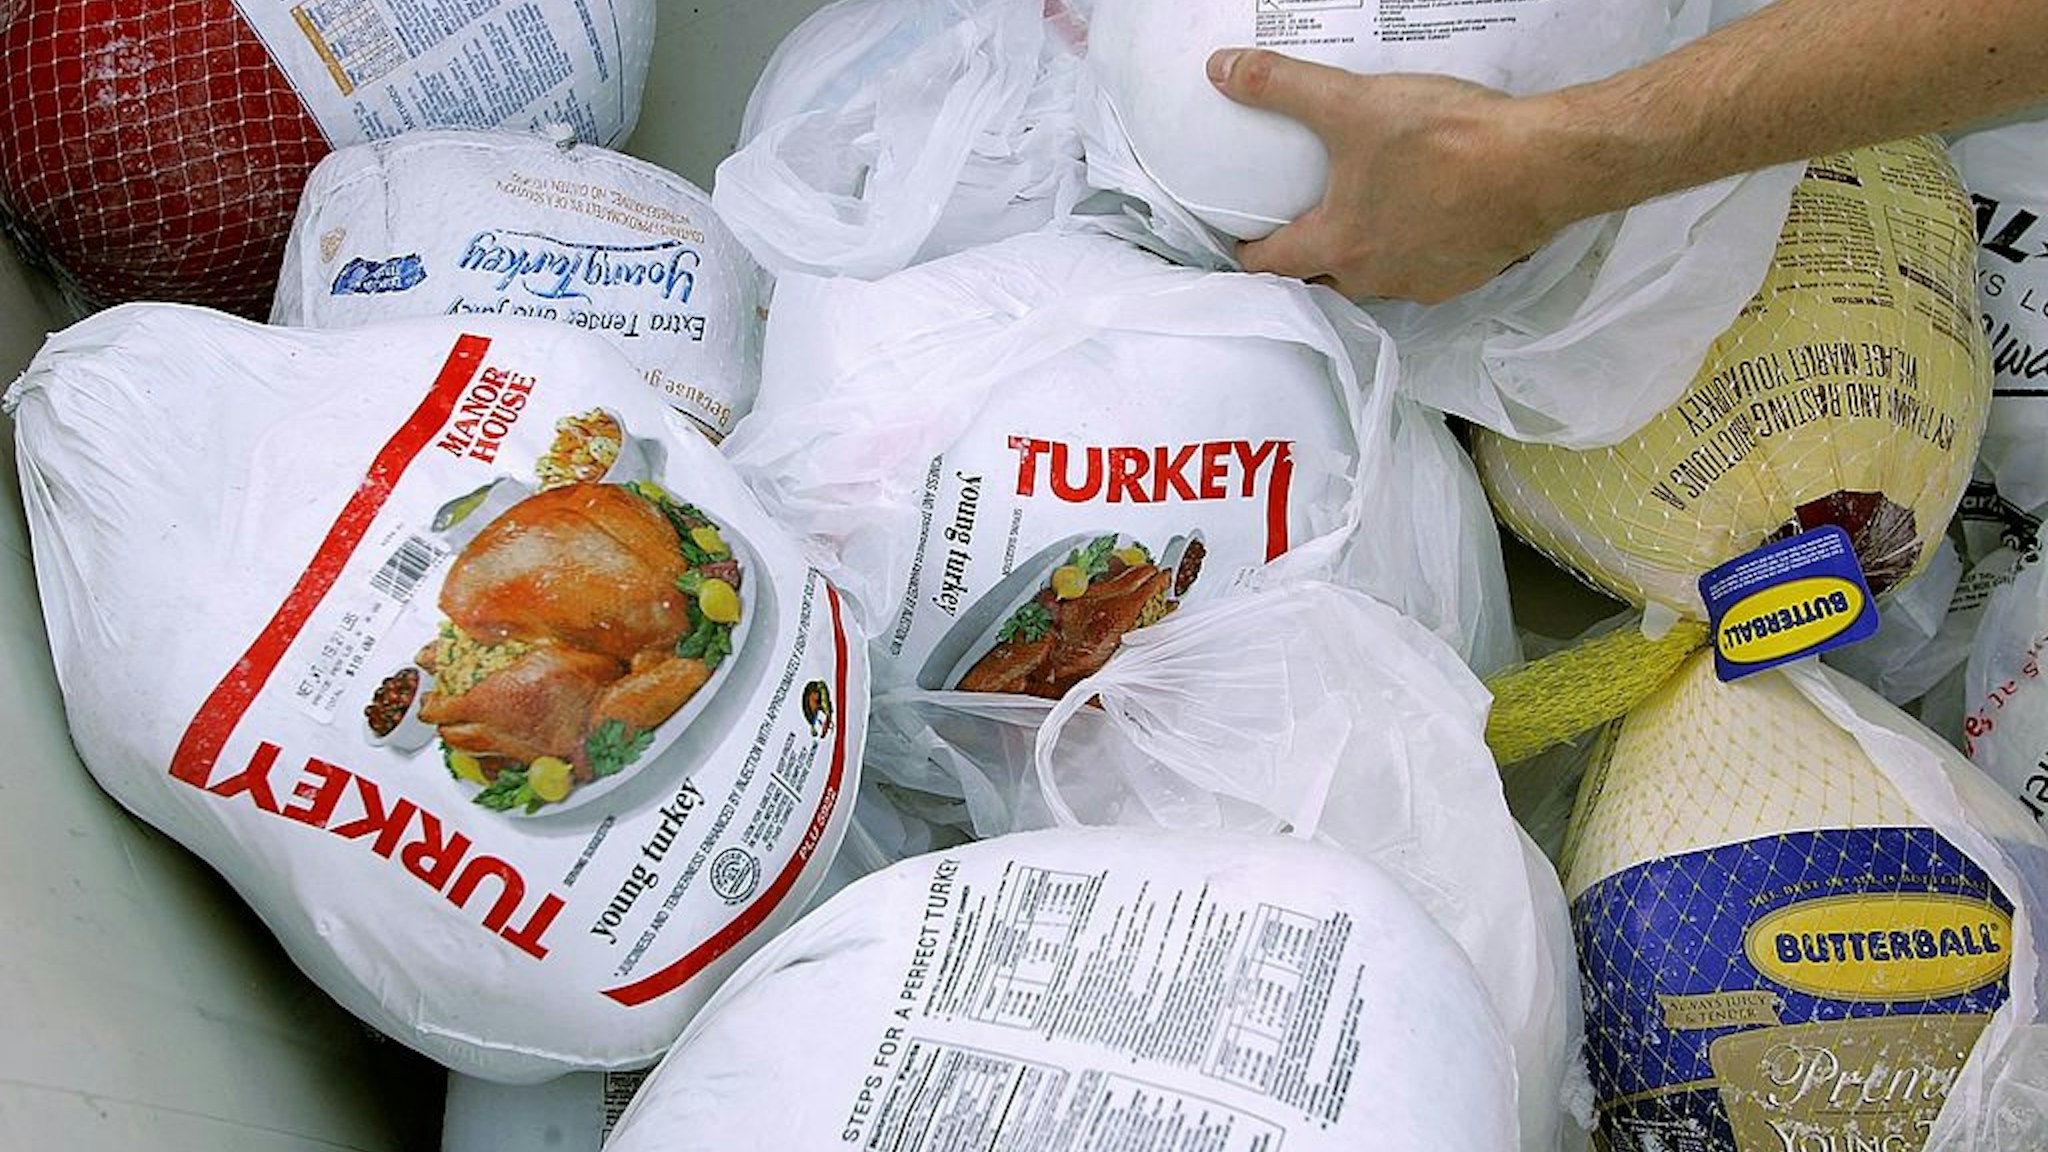 SAN FRANCISCO - NOVEMBER 21: A volunteer prepares a box of turkeys to be given out during the 2006 holiday turkey distribution at the San Francisco Food Bank November 21, 2006 in San Francisco, California. Despite donations being down at most food banks across the country, the San Francisco Food Bank will distribute over 1,500 turkeys to churches and community centers over the holiday season.